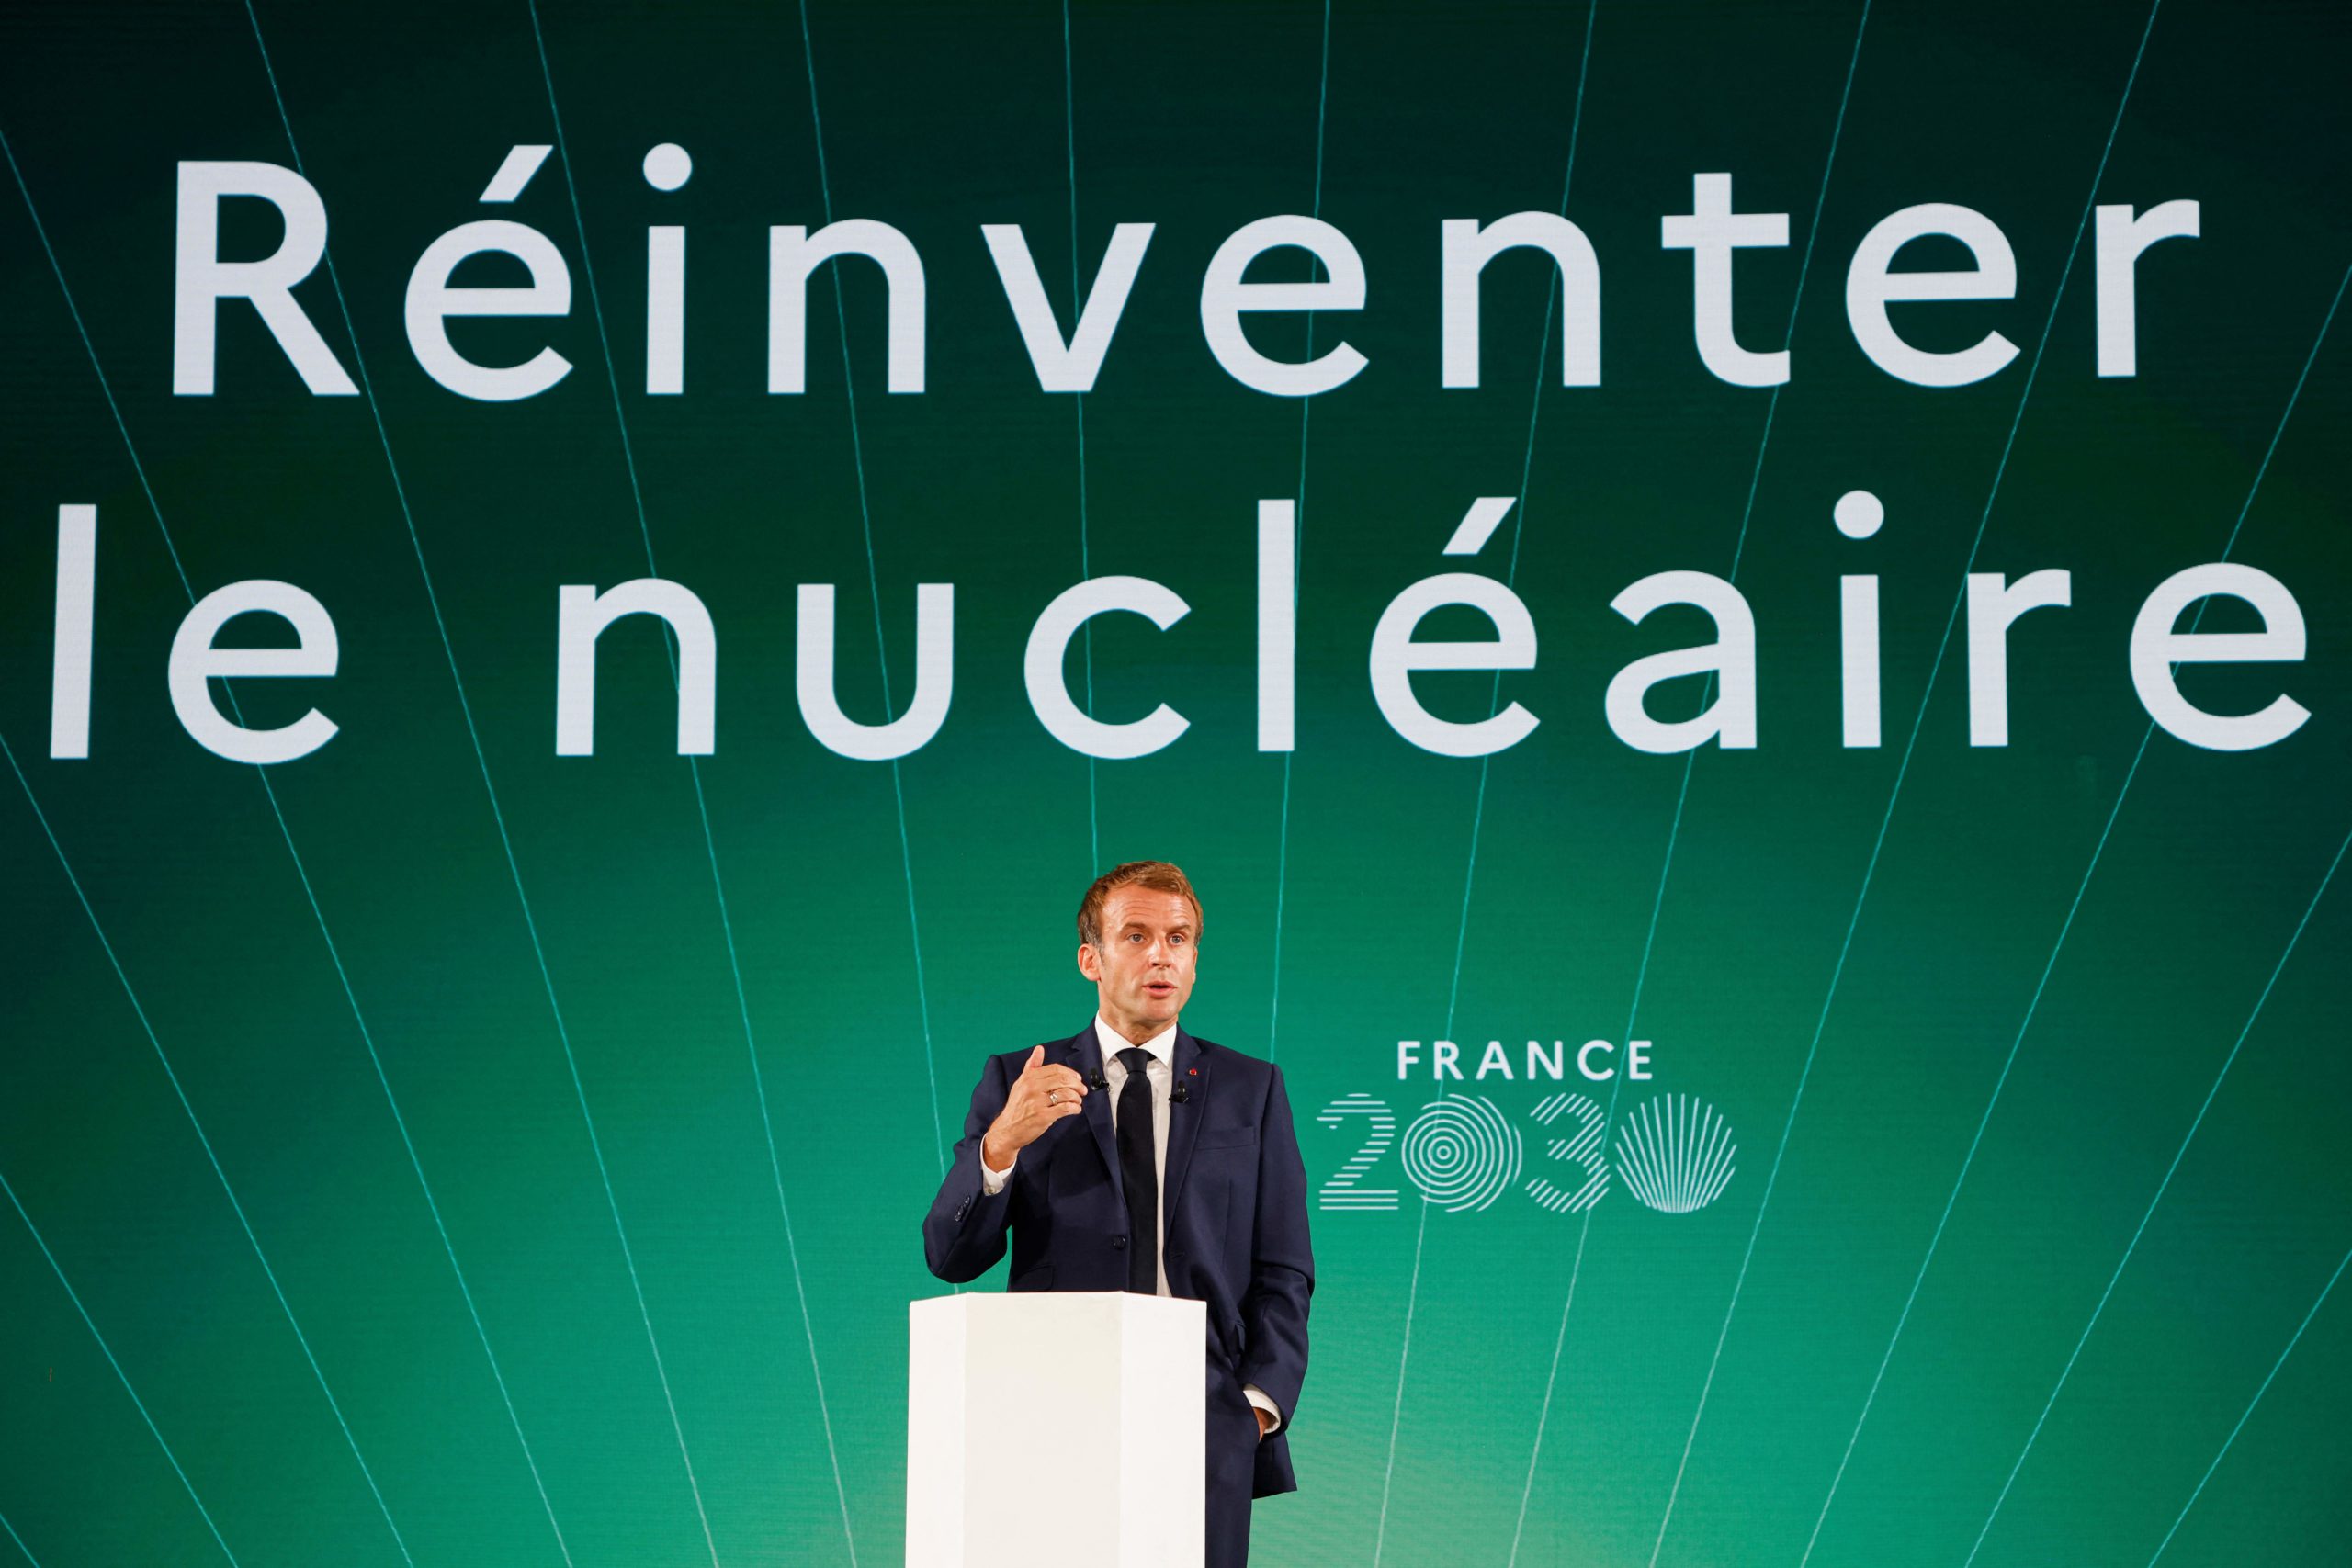 French President Emmanuel Macron speaks during a presentation of the "France 2030" investment plan in Paris, on Oct. 12. (Ludovic Marin/Pool/AFP via Getty Images)